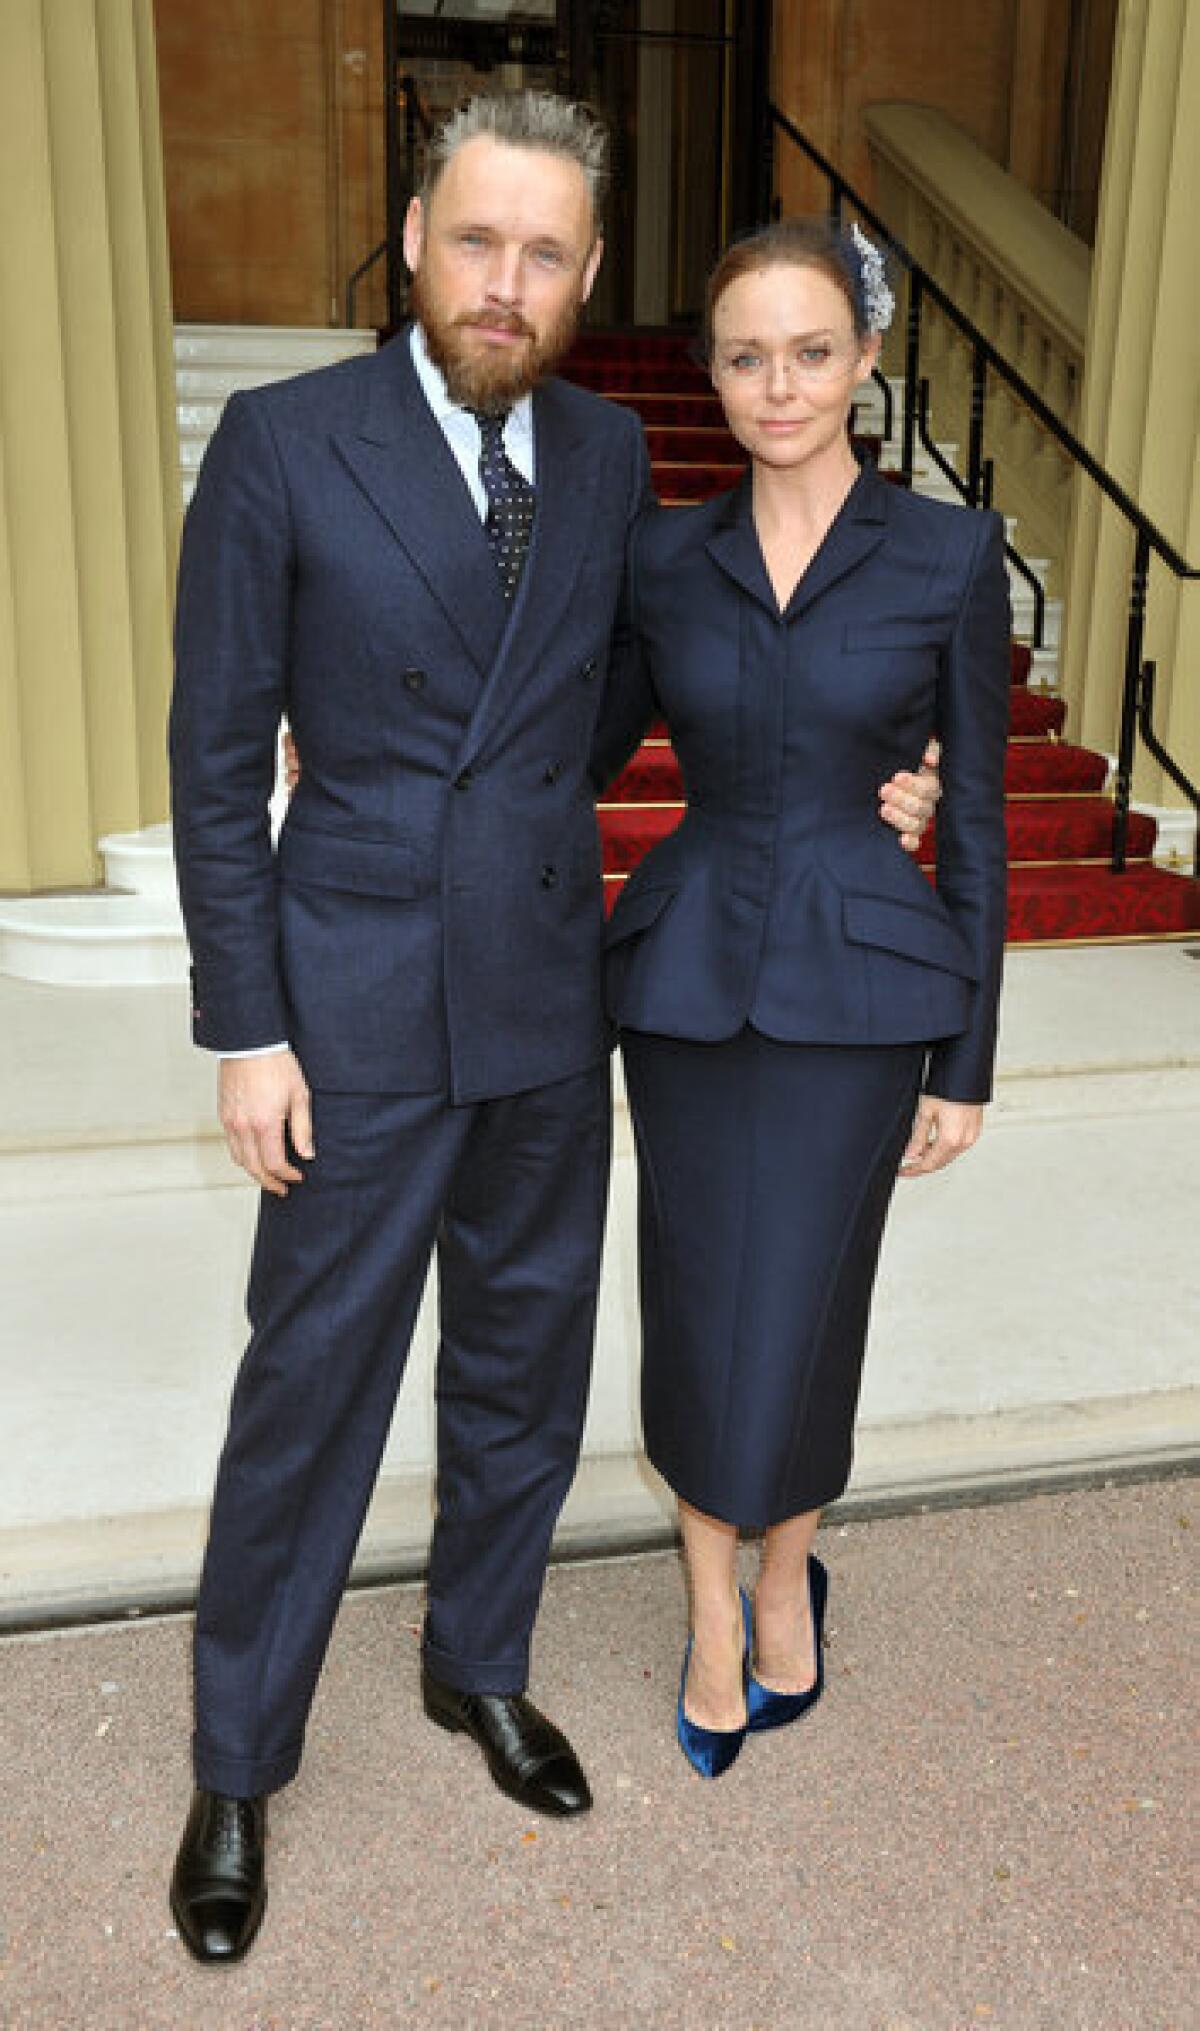 Stella McCartney arrives with husband Alasdhair Willis for a ceremony at Buckingham Palace, where she was made an officer of the Order of the British Empire.